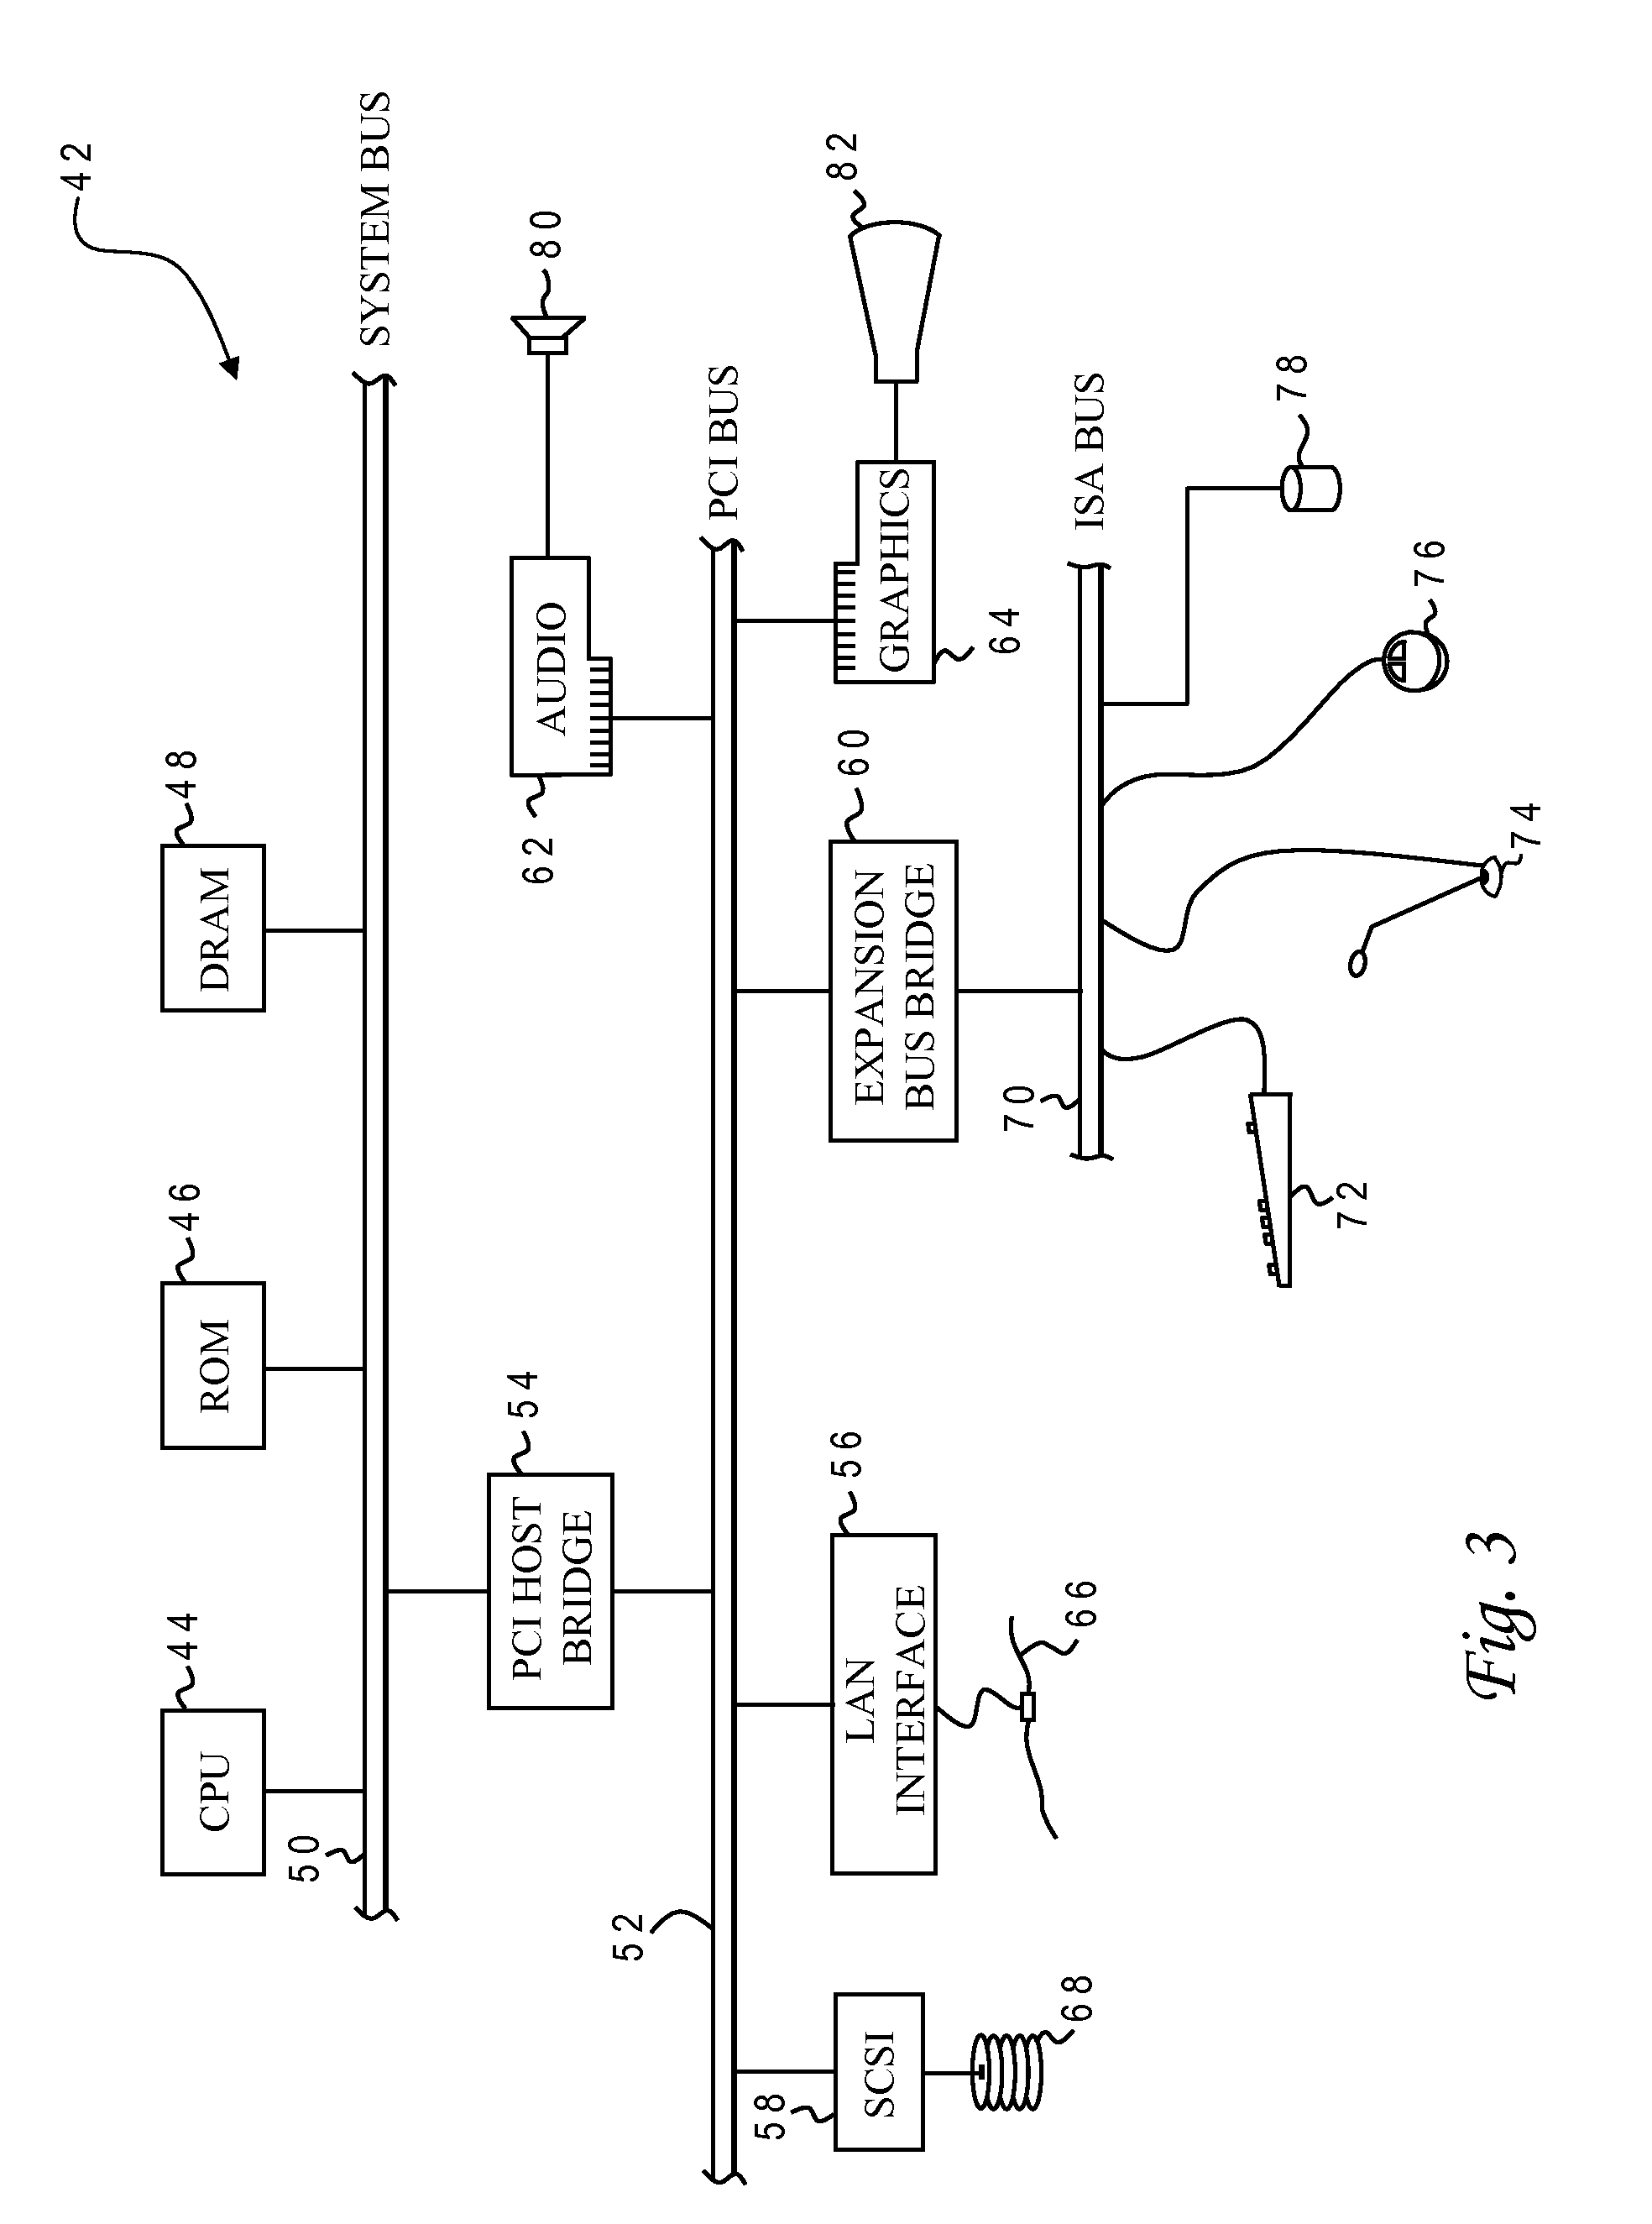 Method of building a validation database